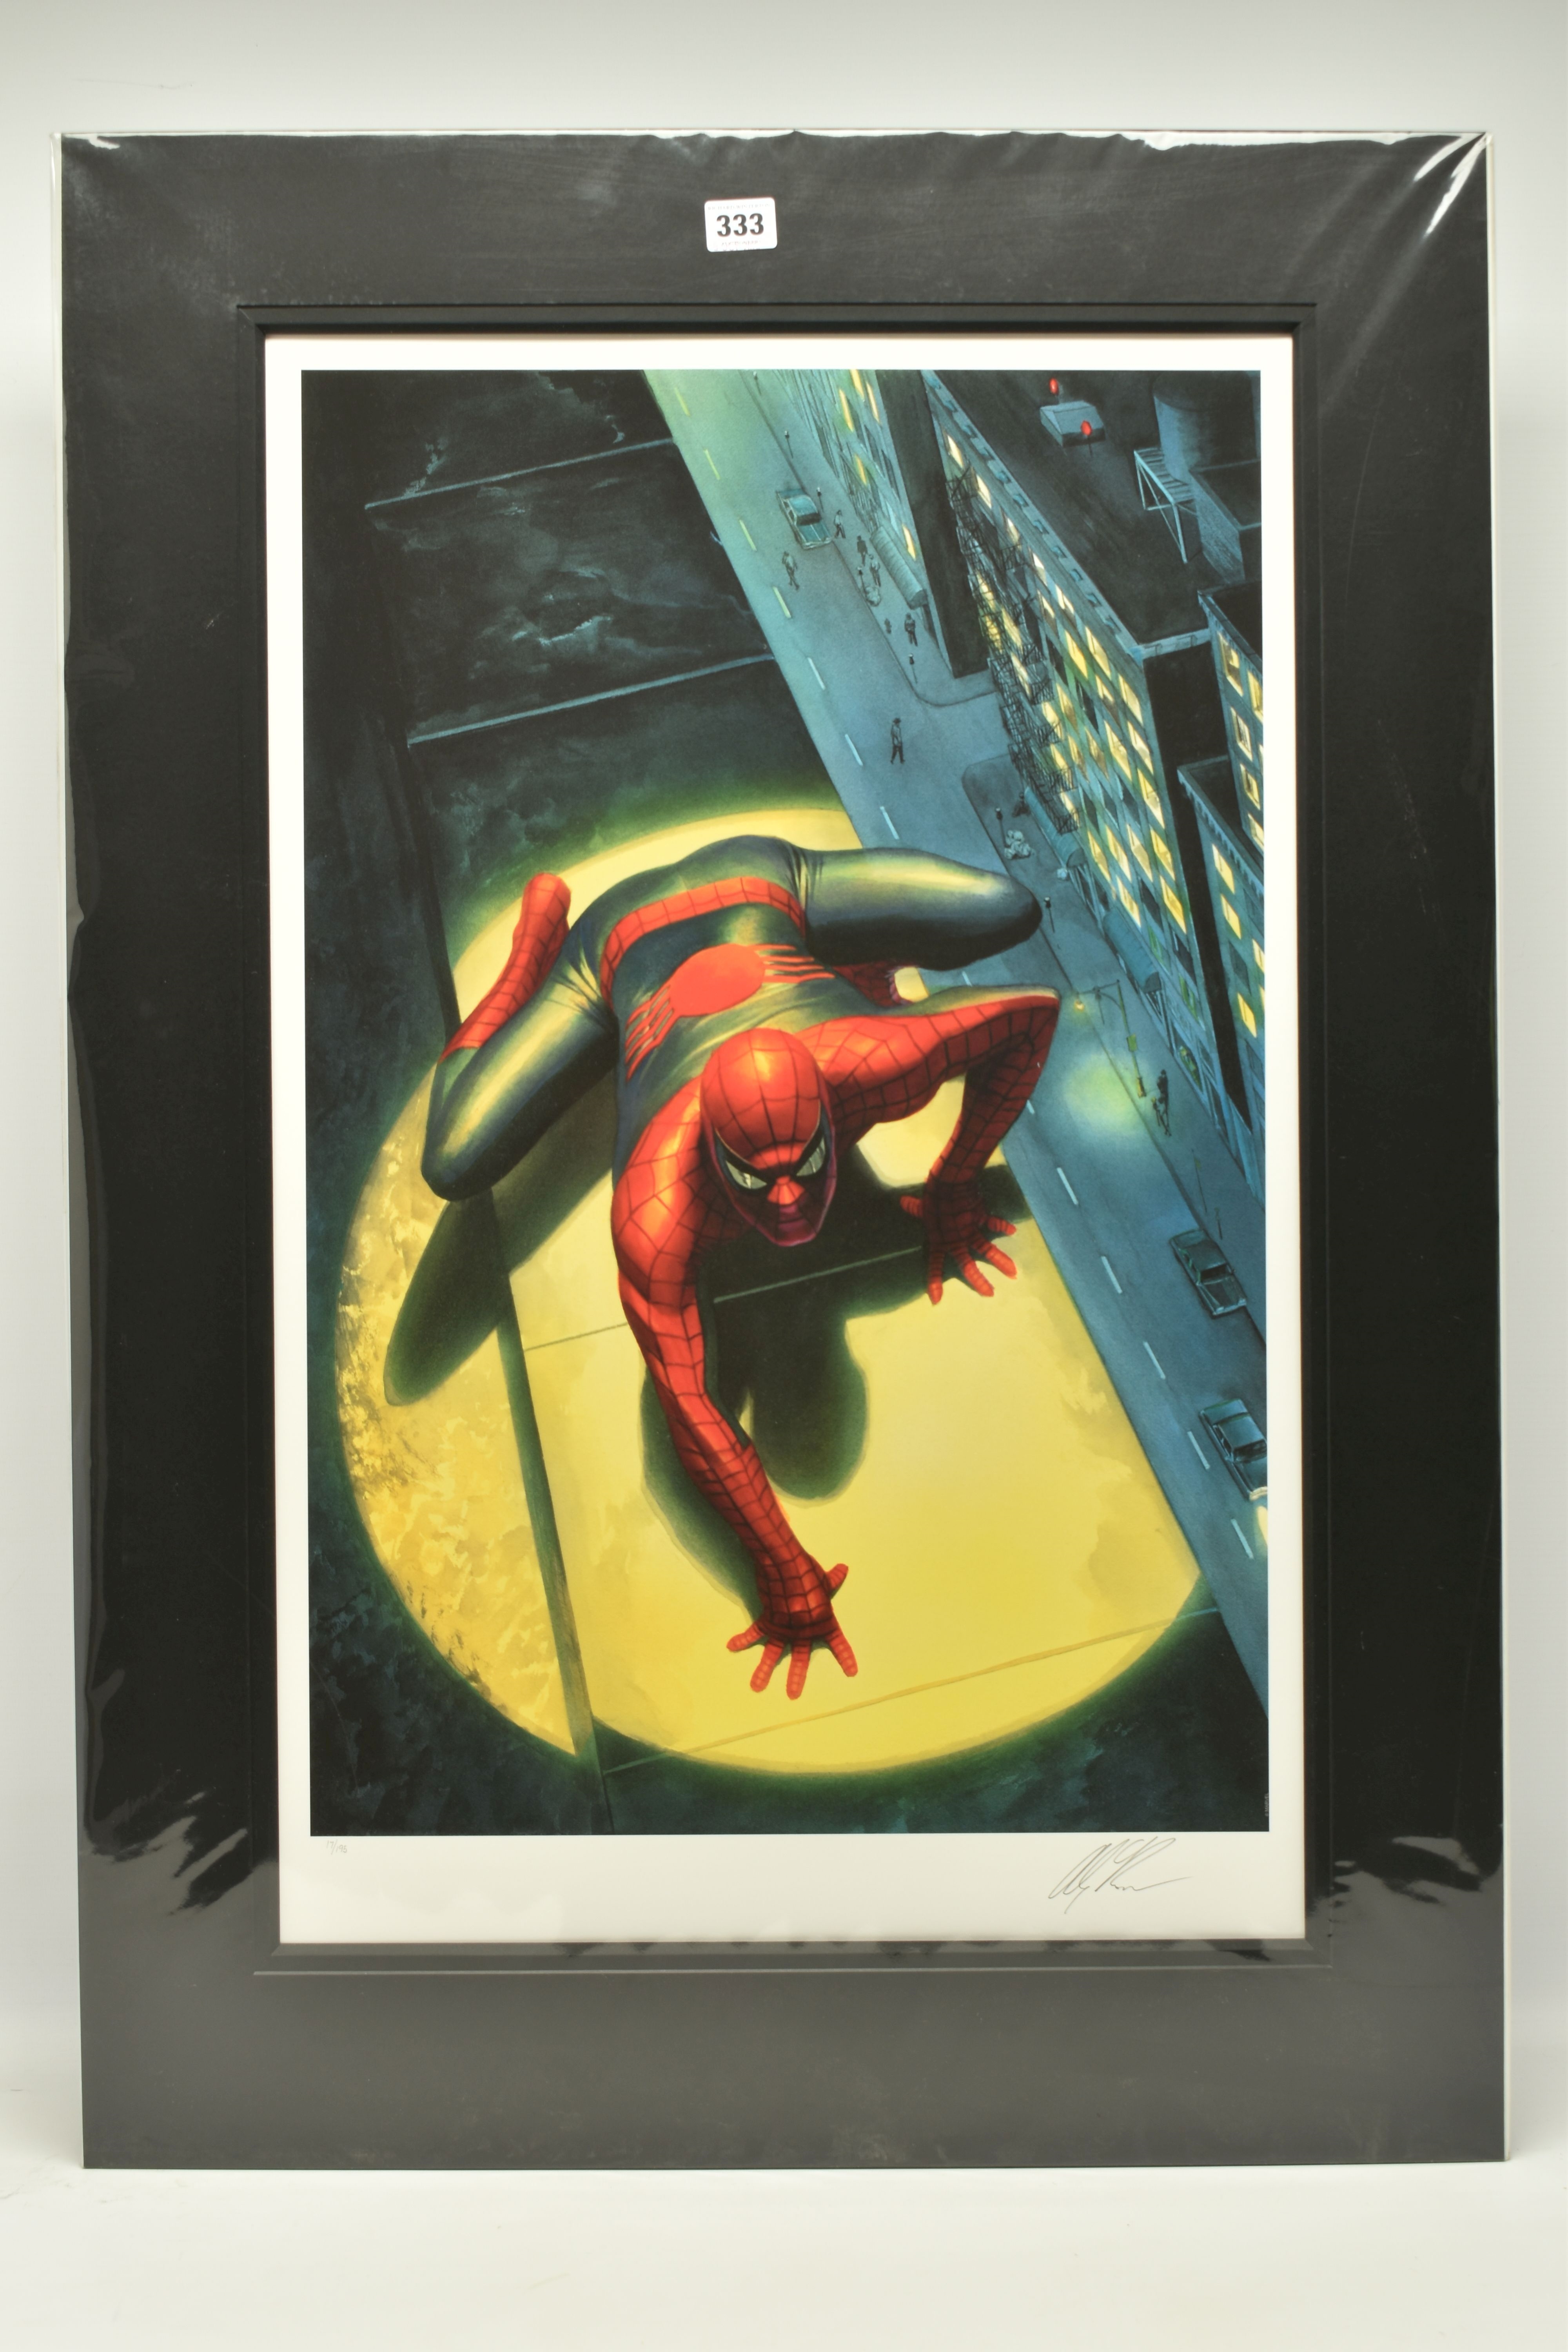 ALEX ROSS FOR MARVEL COMICS (AMERICAN CONTEMPORARY) 'THE SPECTACULAR SPIDERMAN', a signed limited by Alex Ross